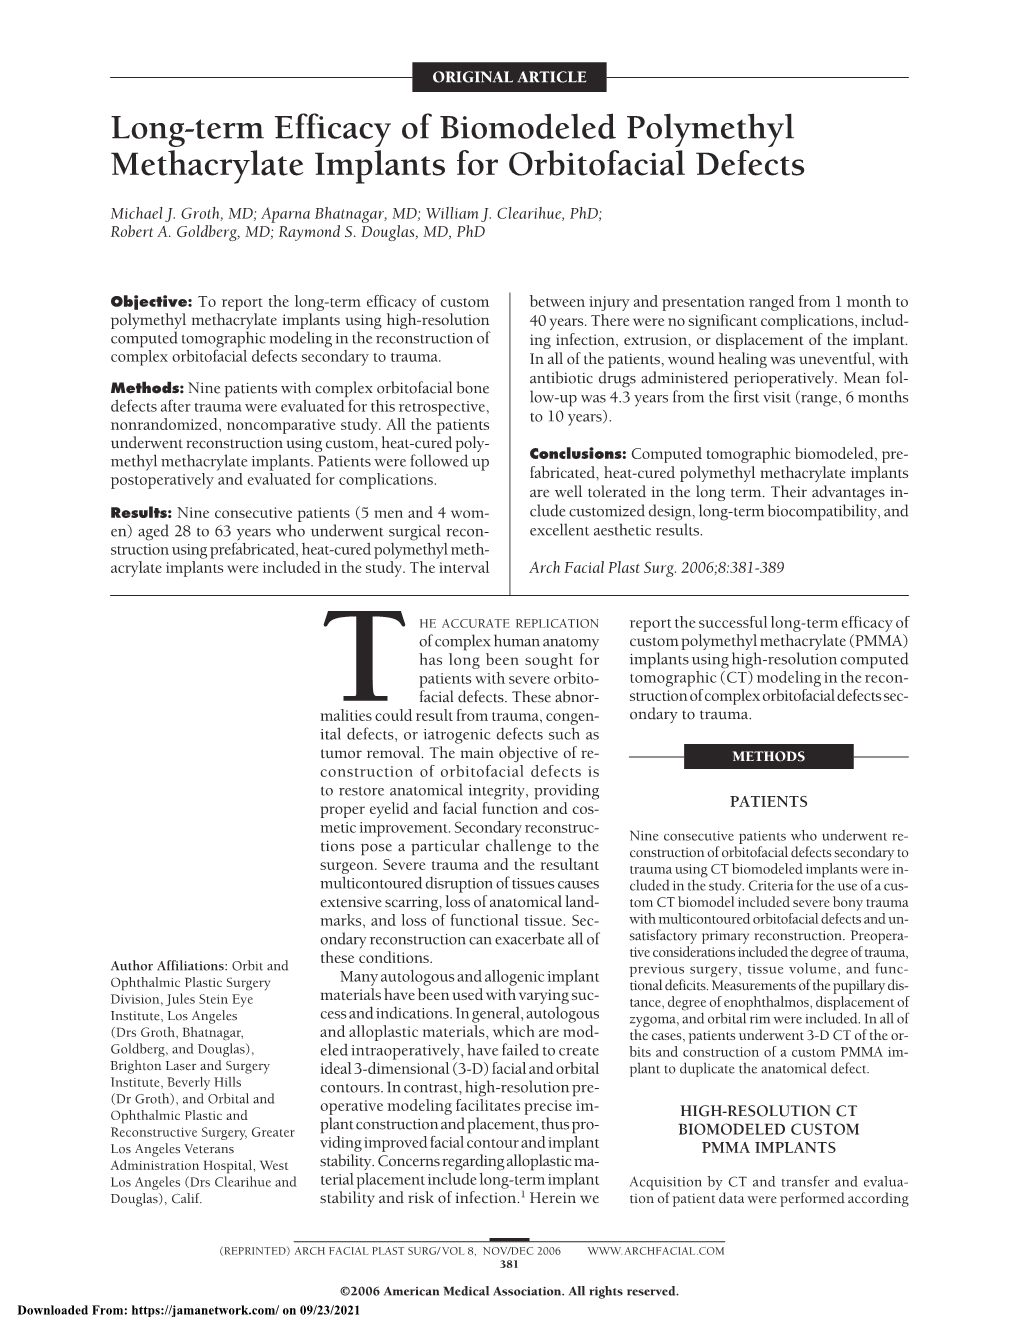 Long-Term Efficacy of Biomodeled Polymethyl Methacrylate Implants for Orbitofacial Defects